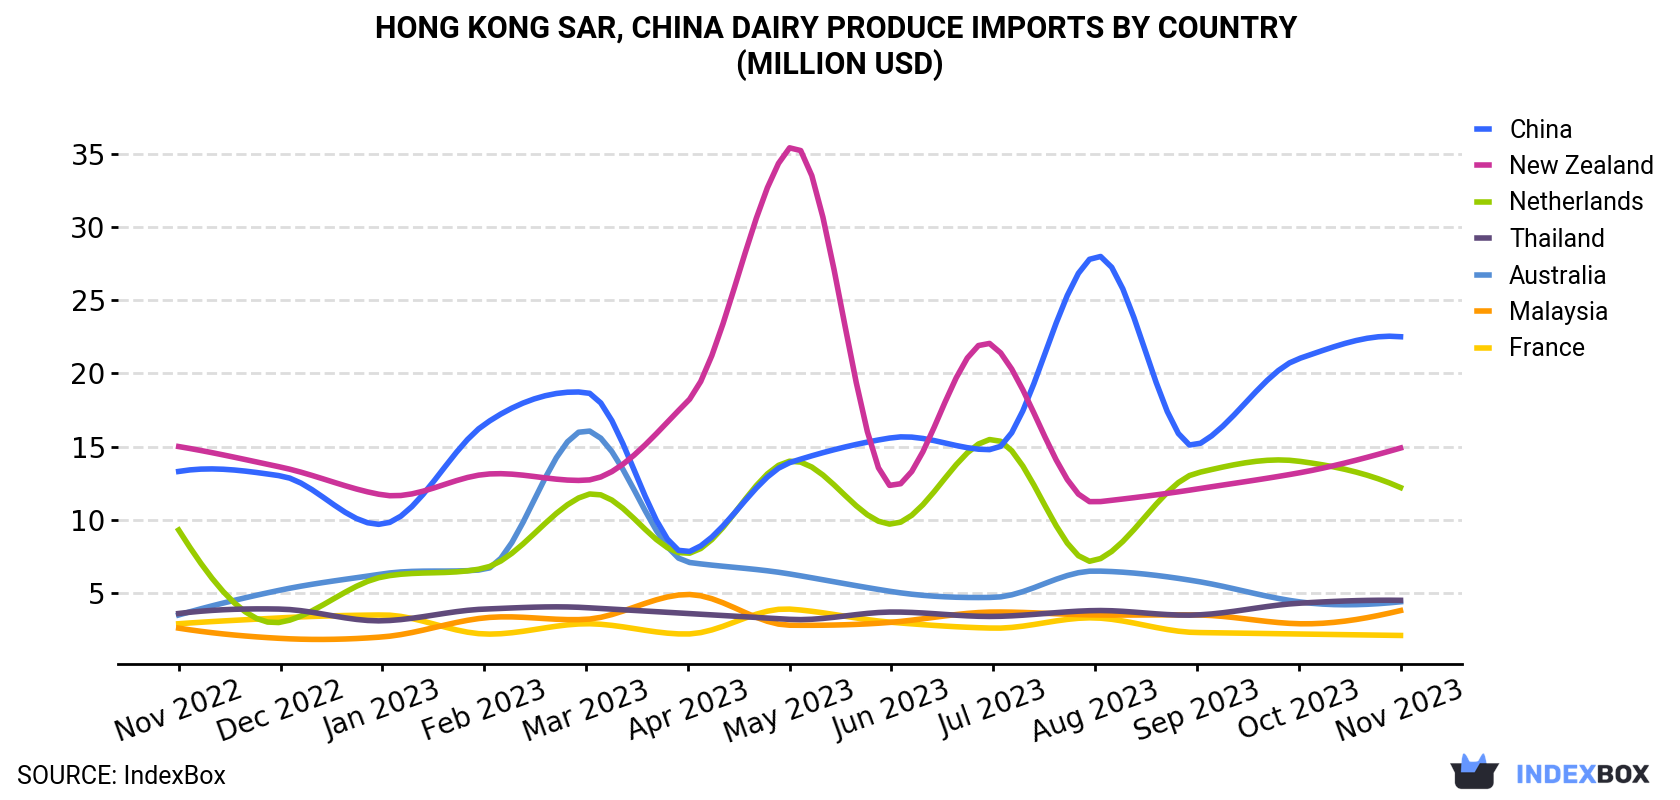 Hong Kong Dairy Produce Imports By Country (Million USD)